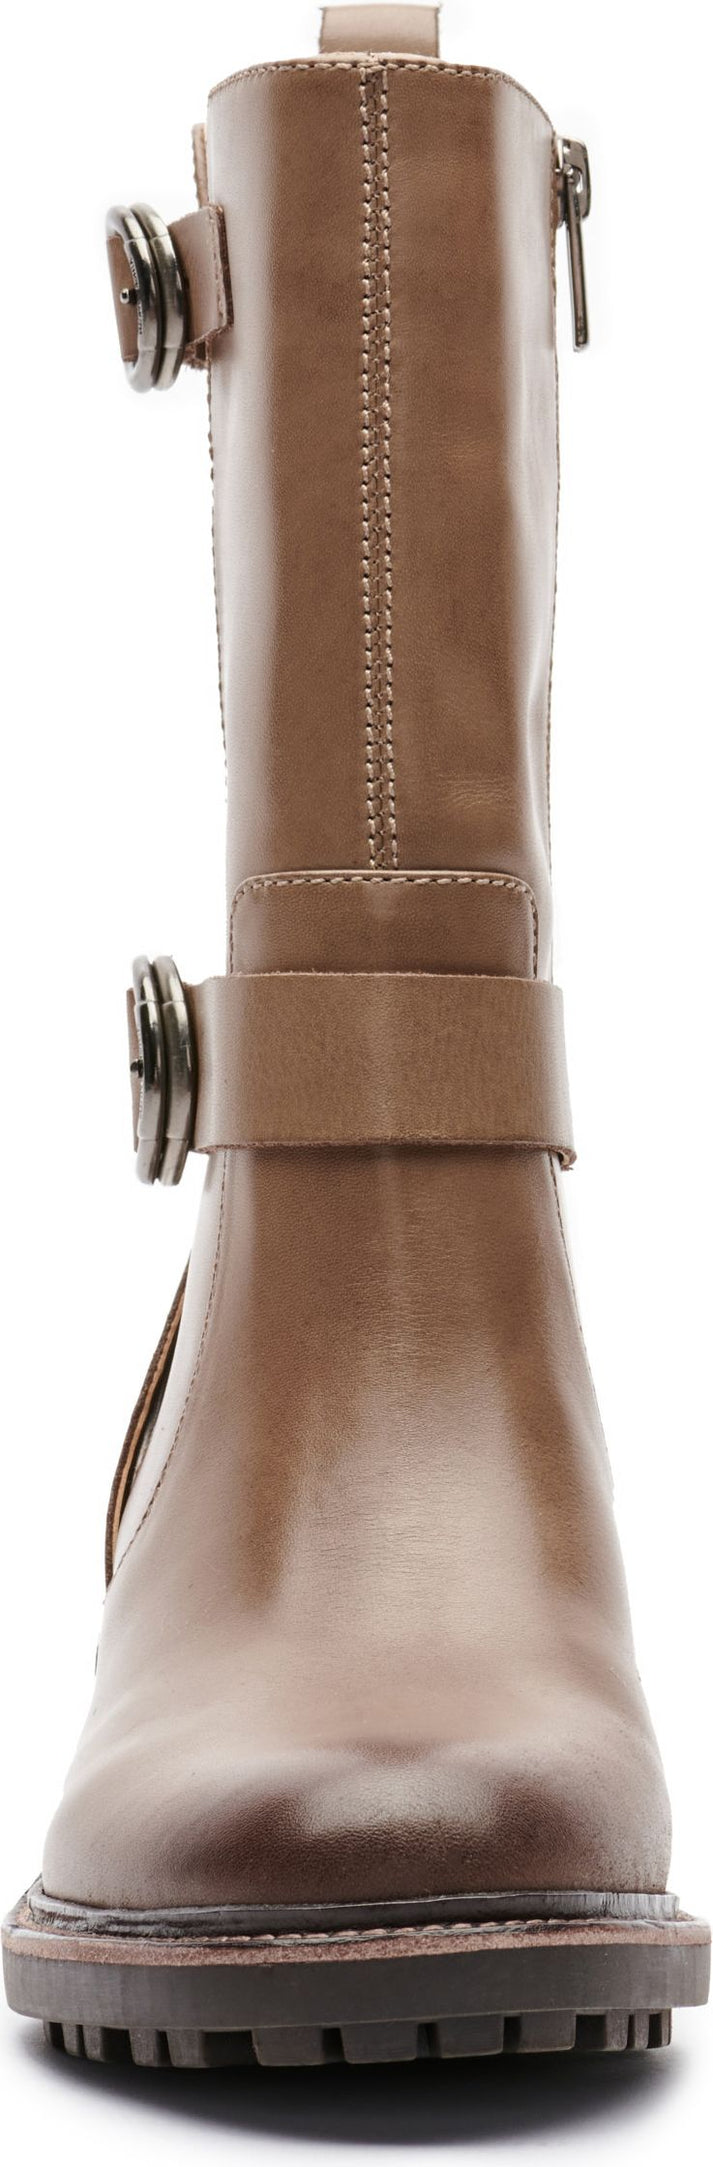 Vince Camuto Boots Kerivini Burnished Leather Tuscan Taupe